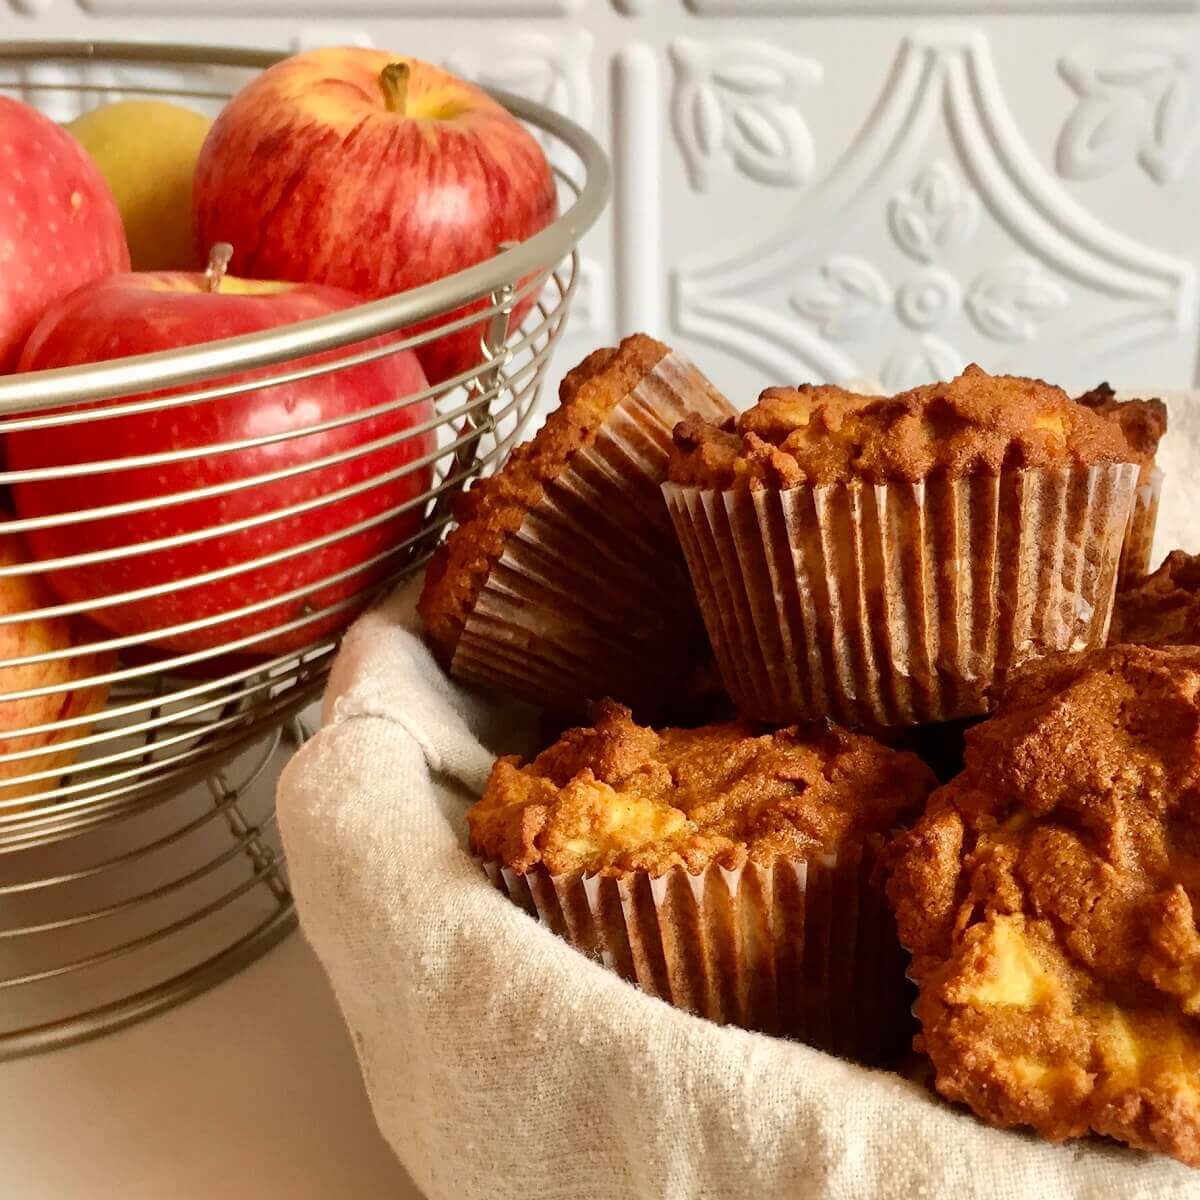 Muffins next to a wire basket full of apples.